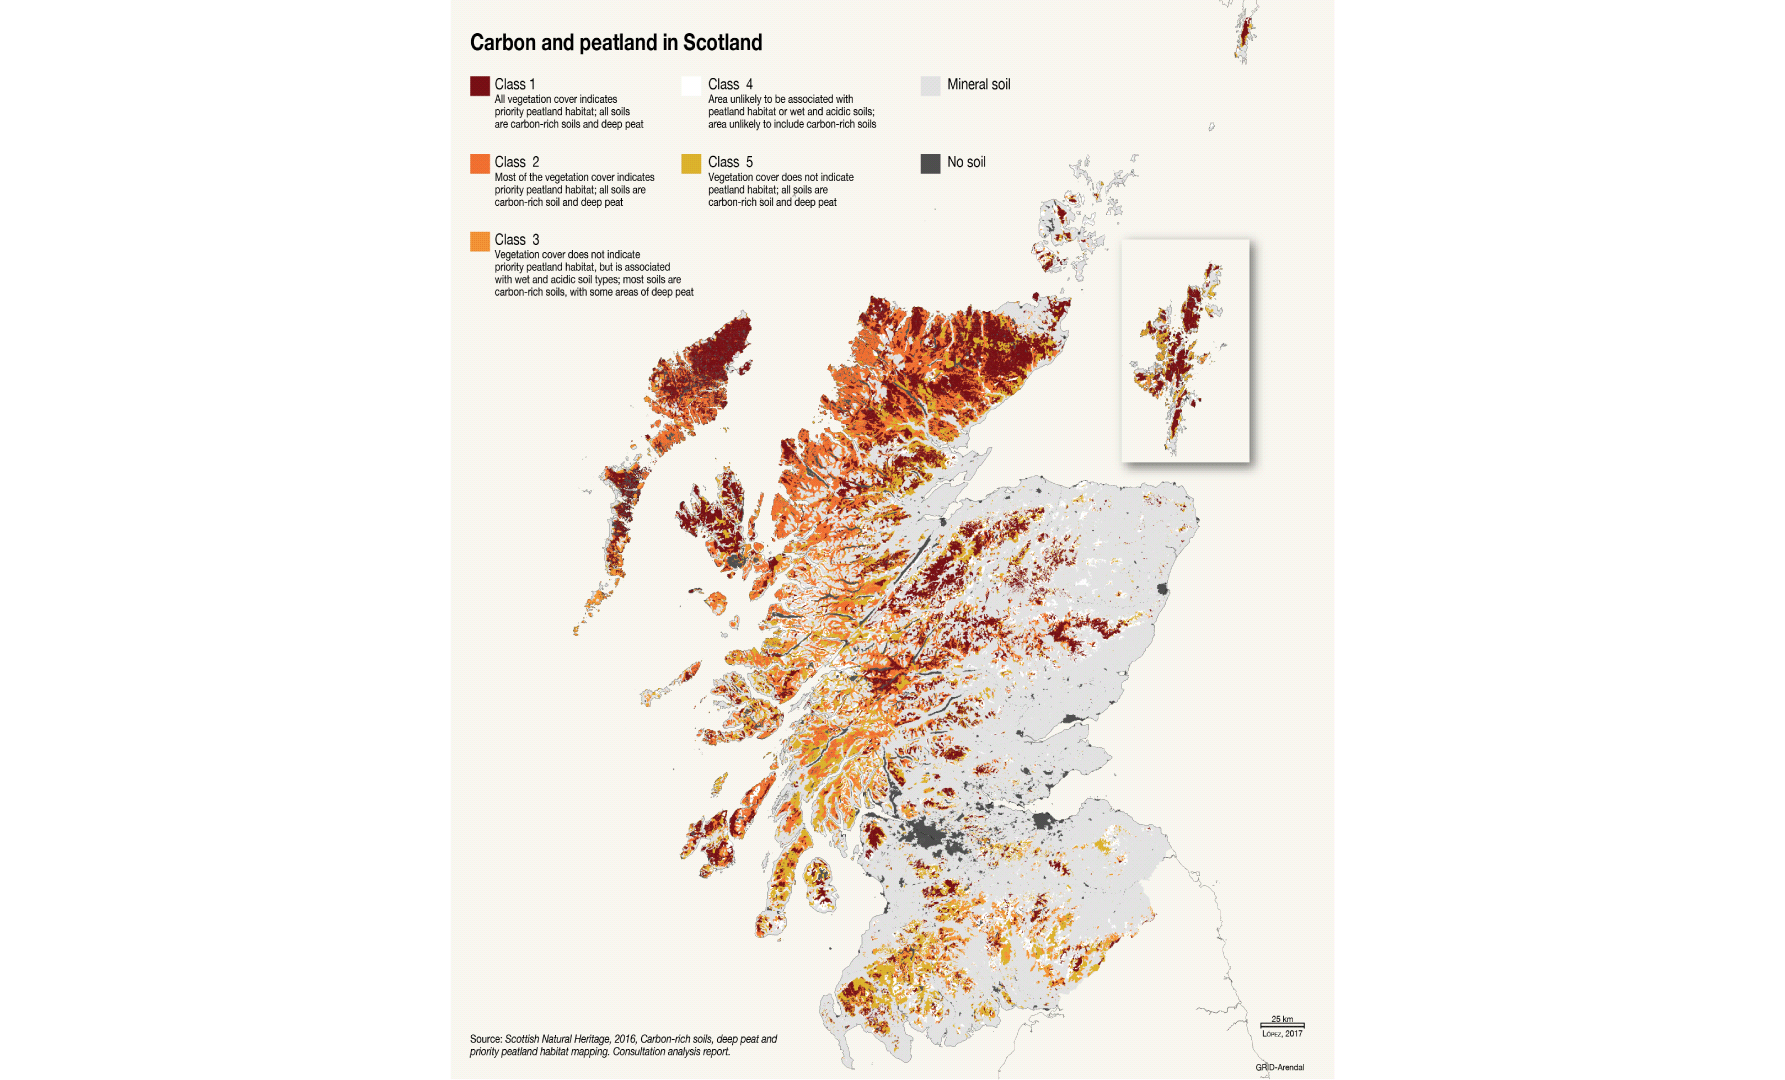 Carbon and peatland in Scotland | GRID-Arendal